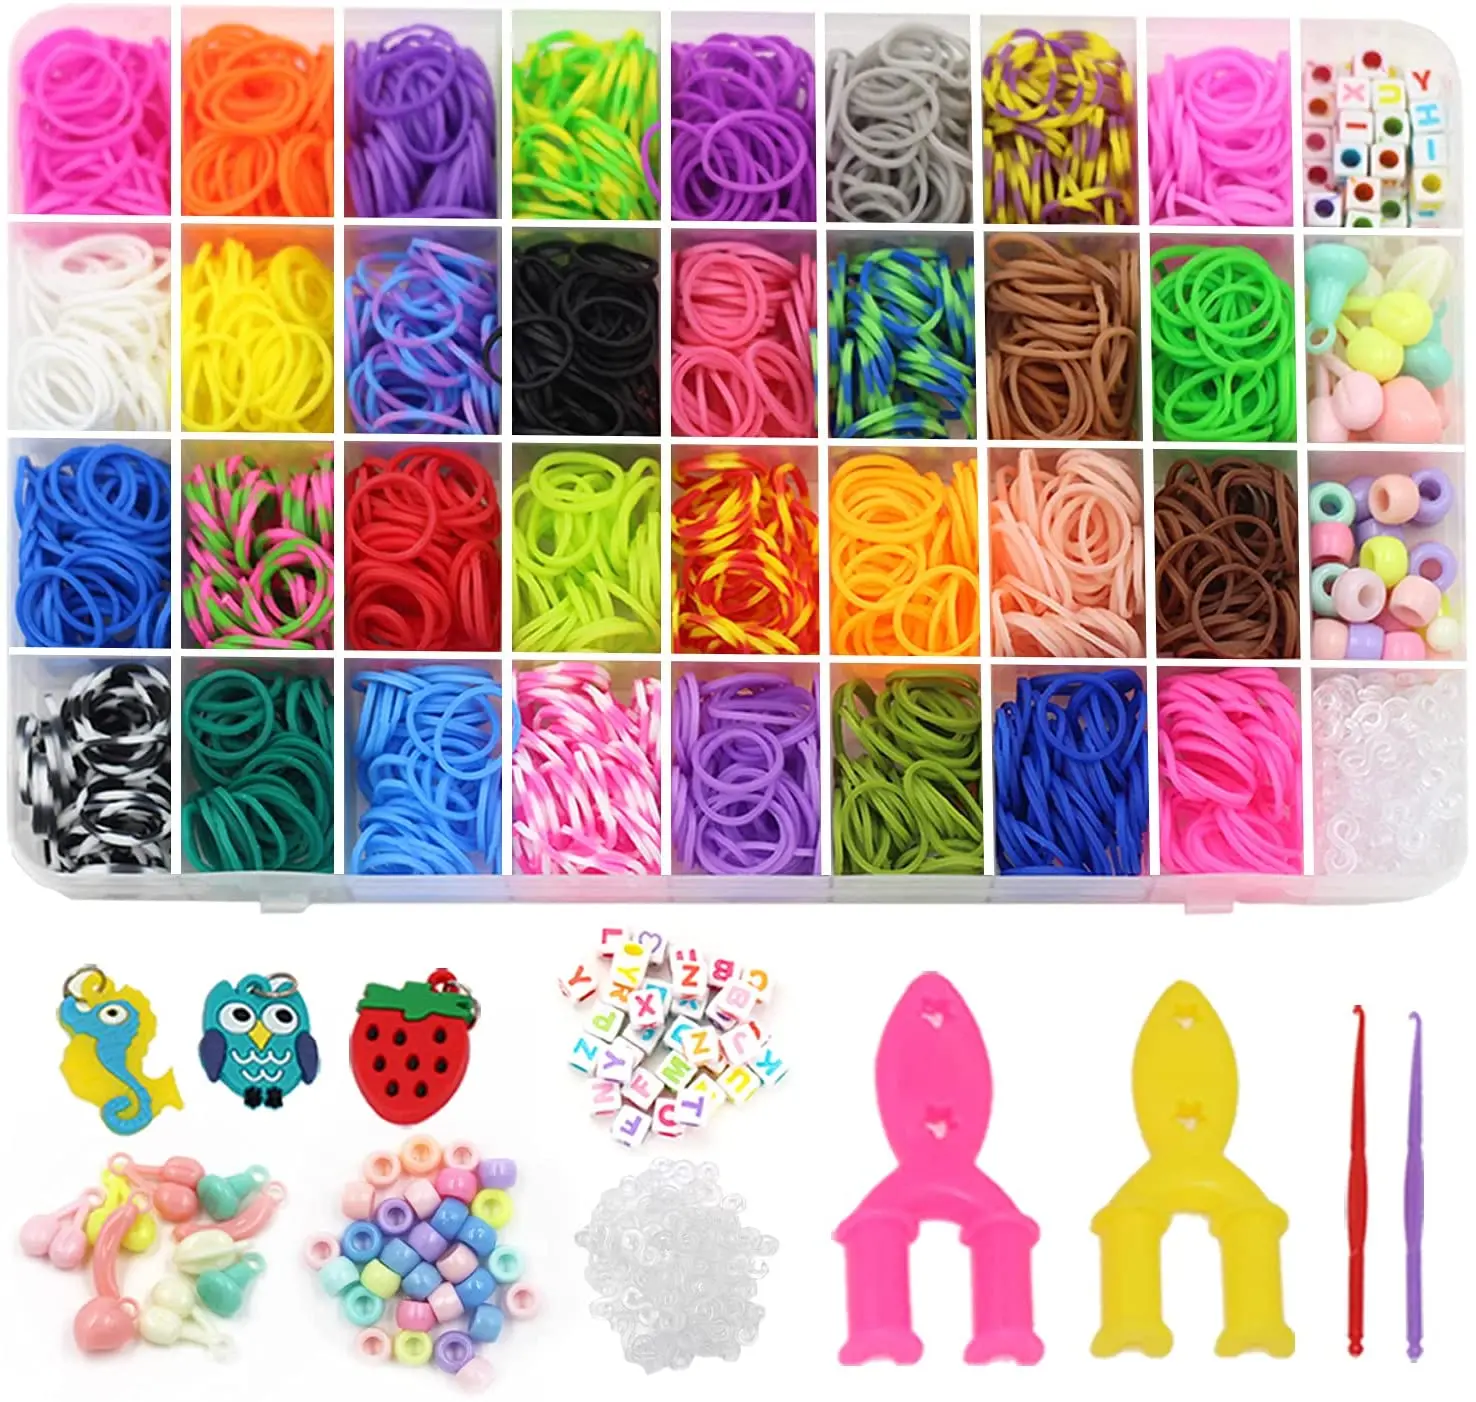 1800 COLOURFUL RAINBOW RUBBER LOOM BANDS BRACELET MAKING KIT W COLOURED S CLIPS 